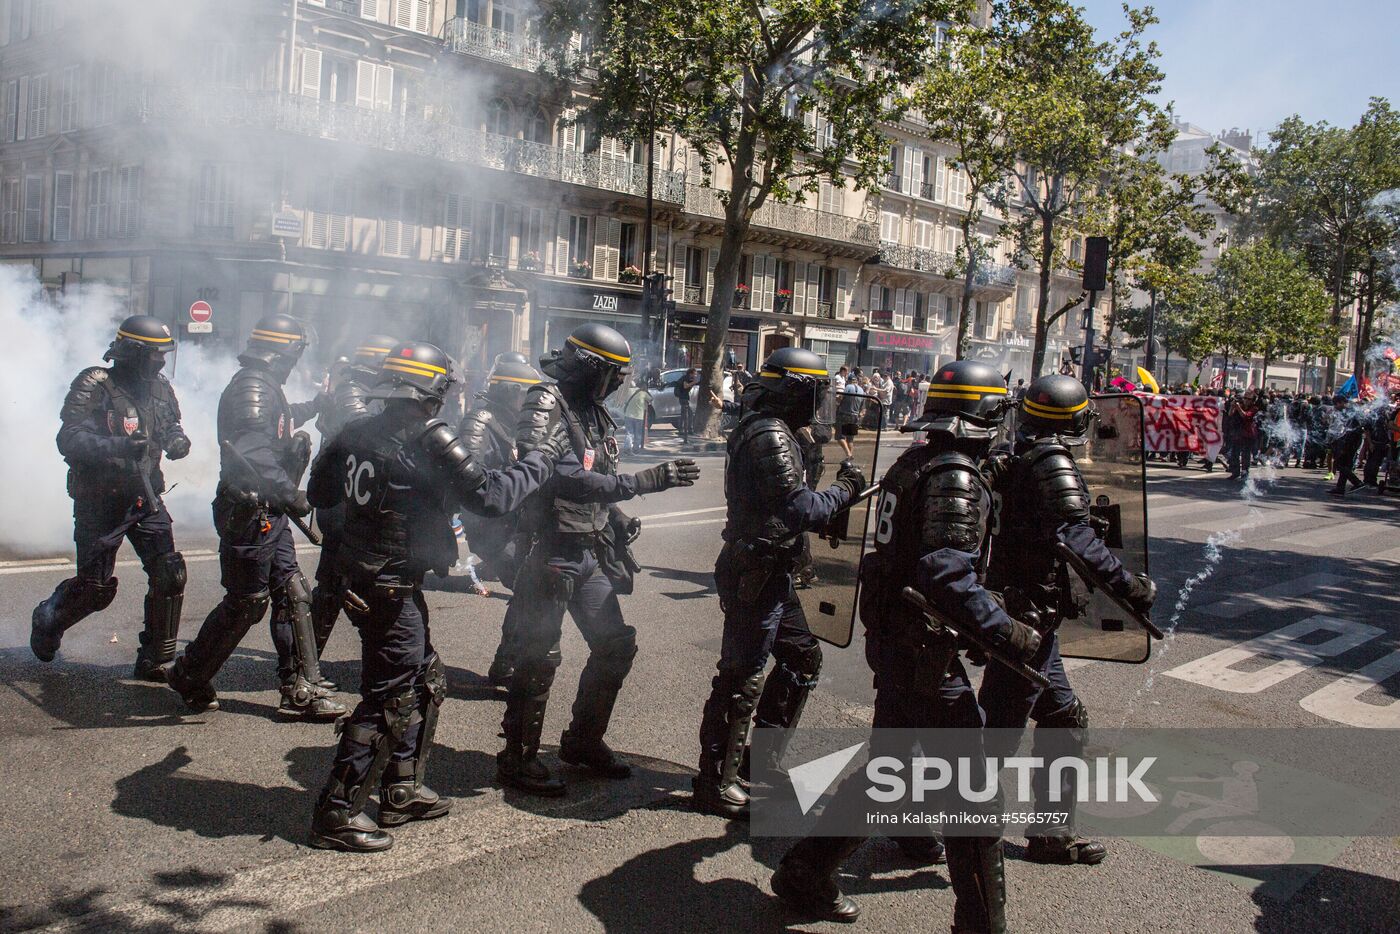 Anti-government rally in Paris